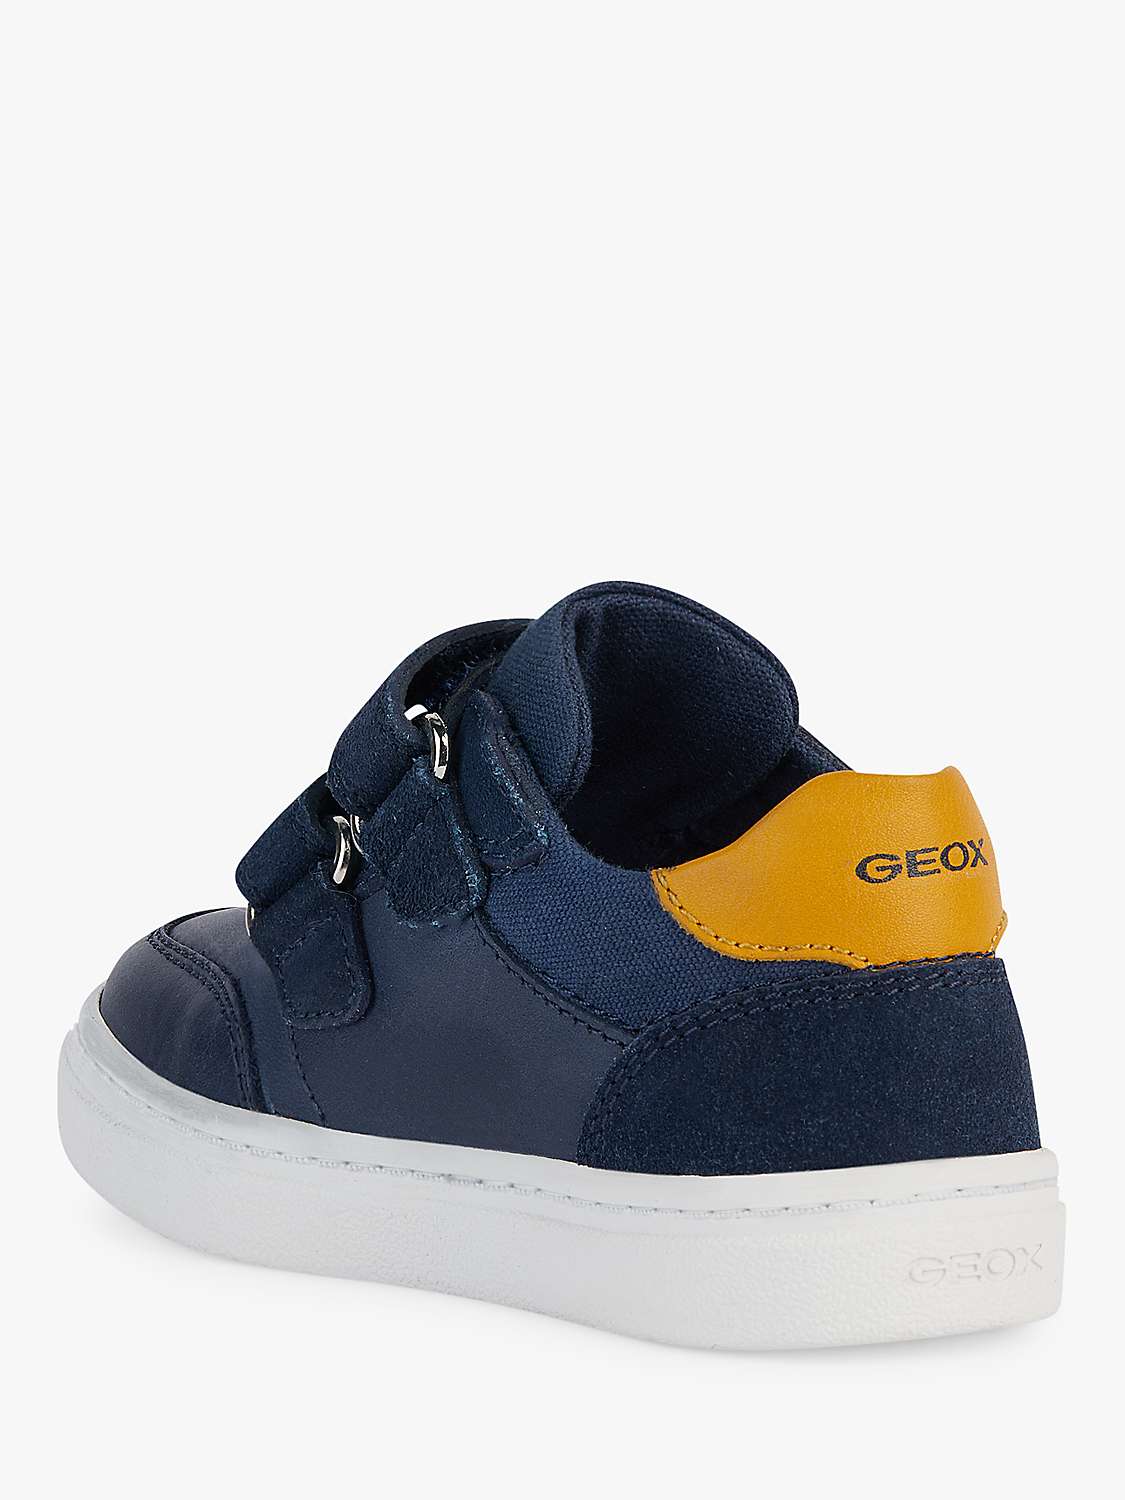 Buy Geox Baby Nashik Leather Blend First Steps Trainers, Navy/Ochre Online at johnlewis.com